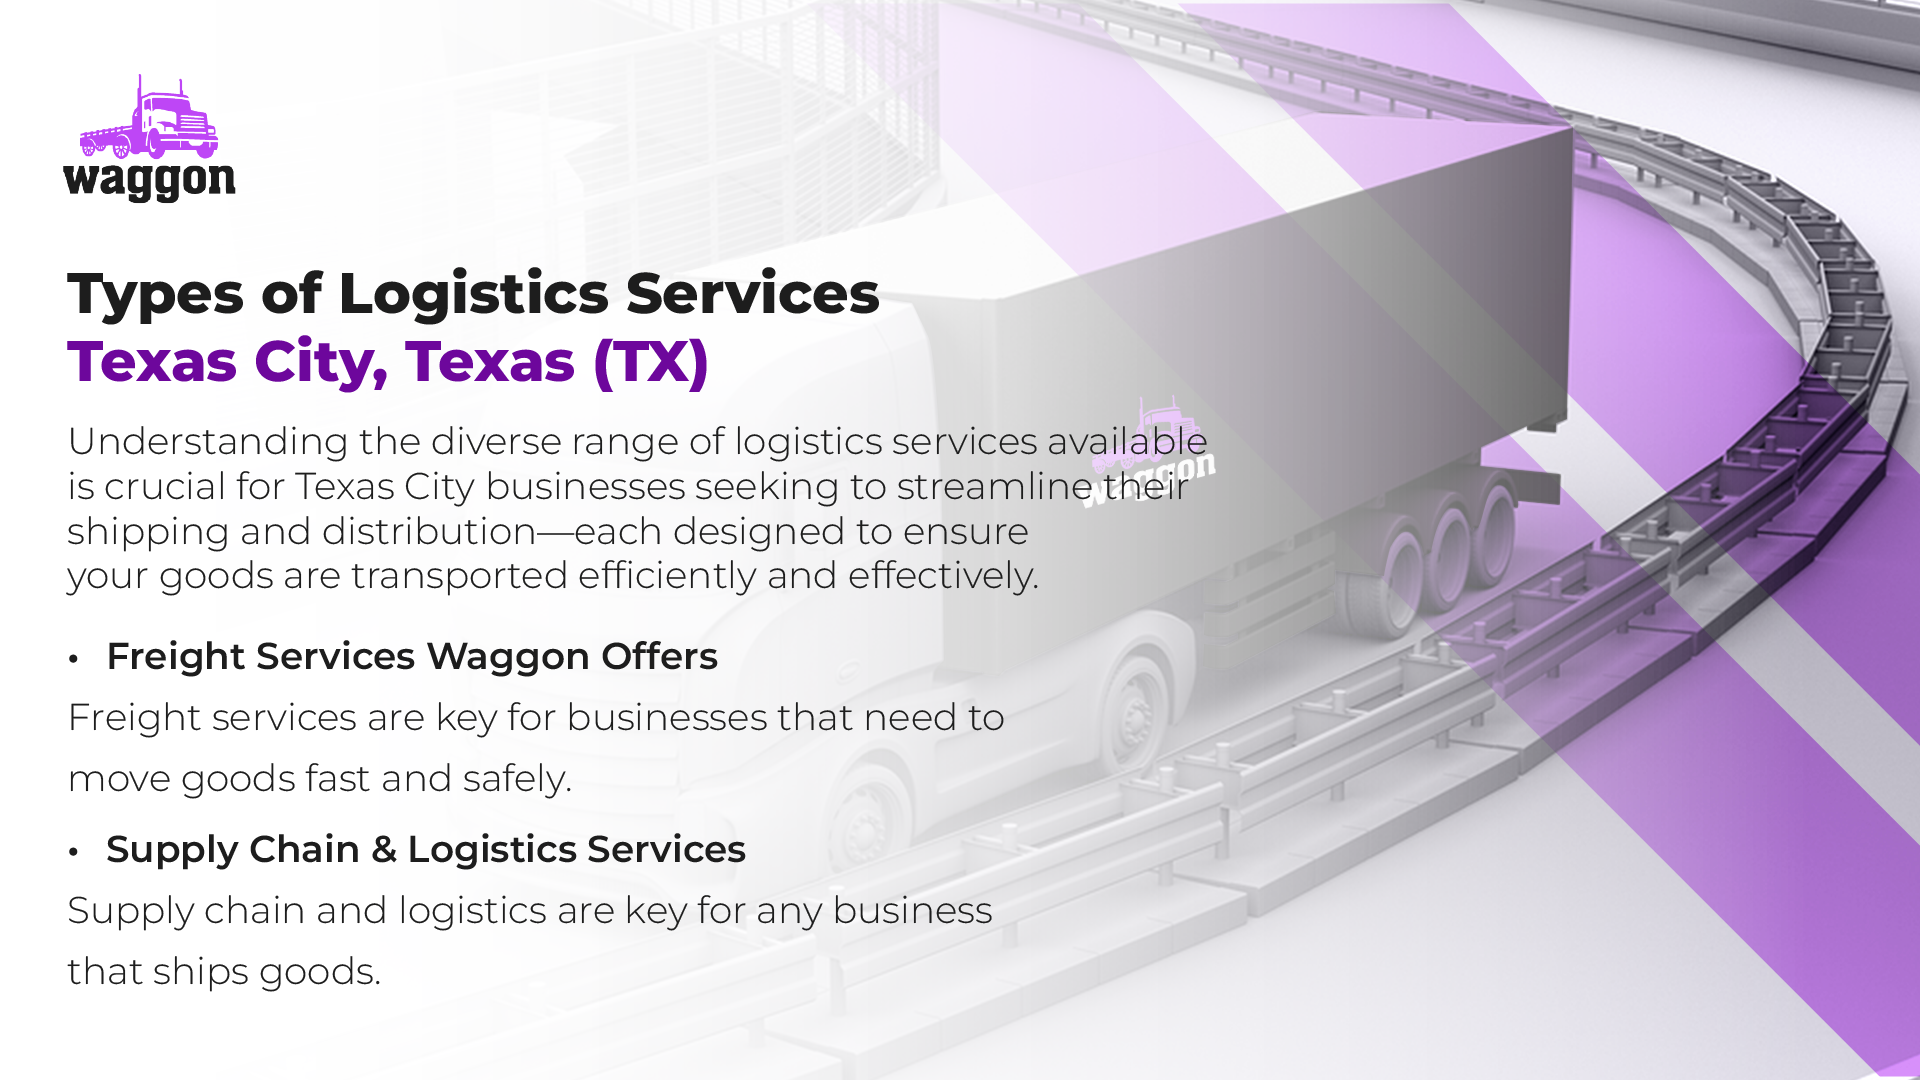 Types of Logistics Services in Texas City, Texas (TX)